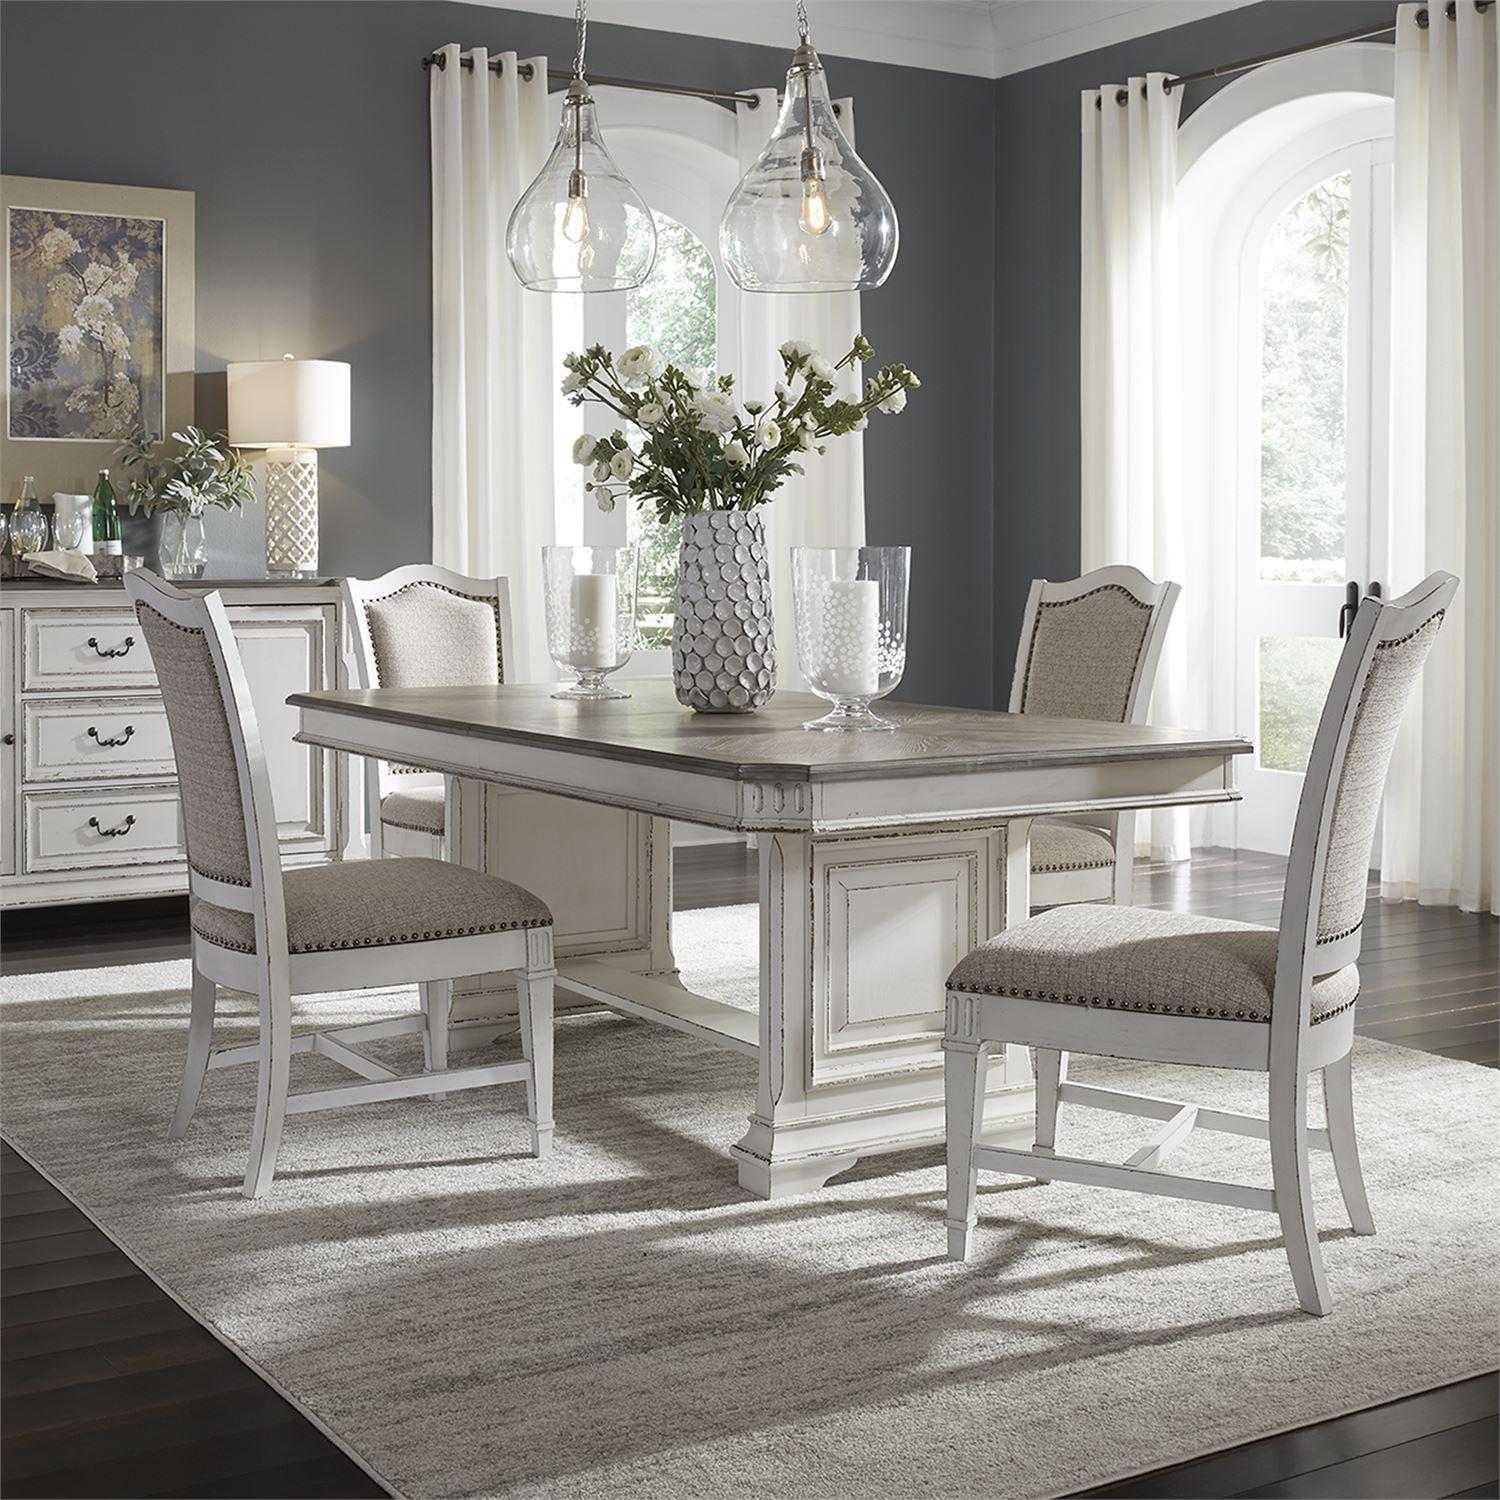 Traditional Dining Room Set Abbey Park 520-DR-5TRS 520-DR-5TRS in White Linen